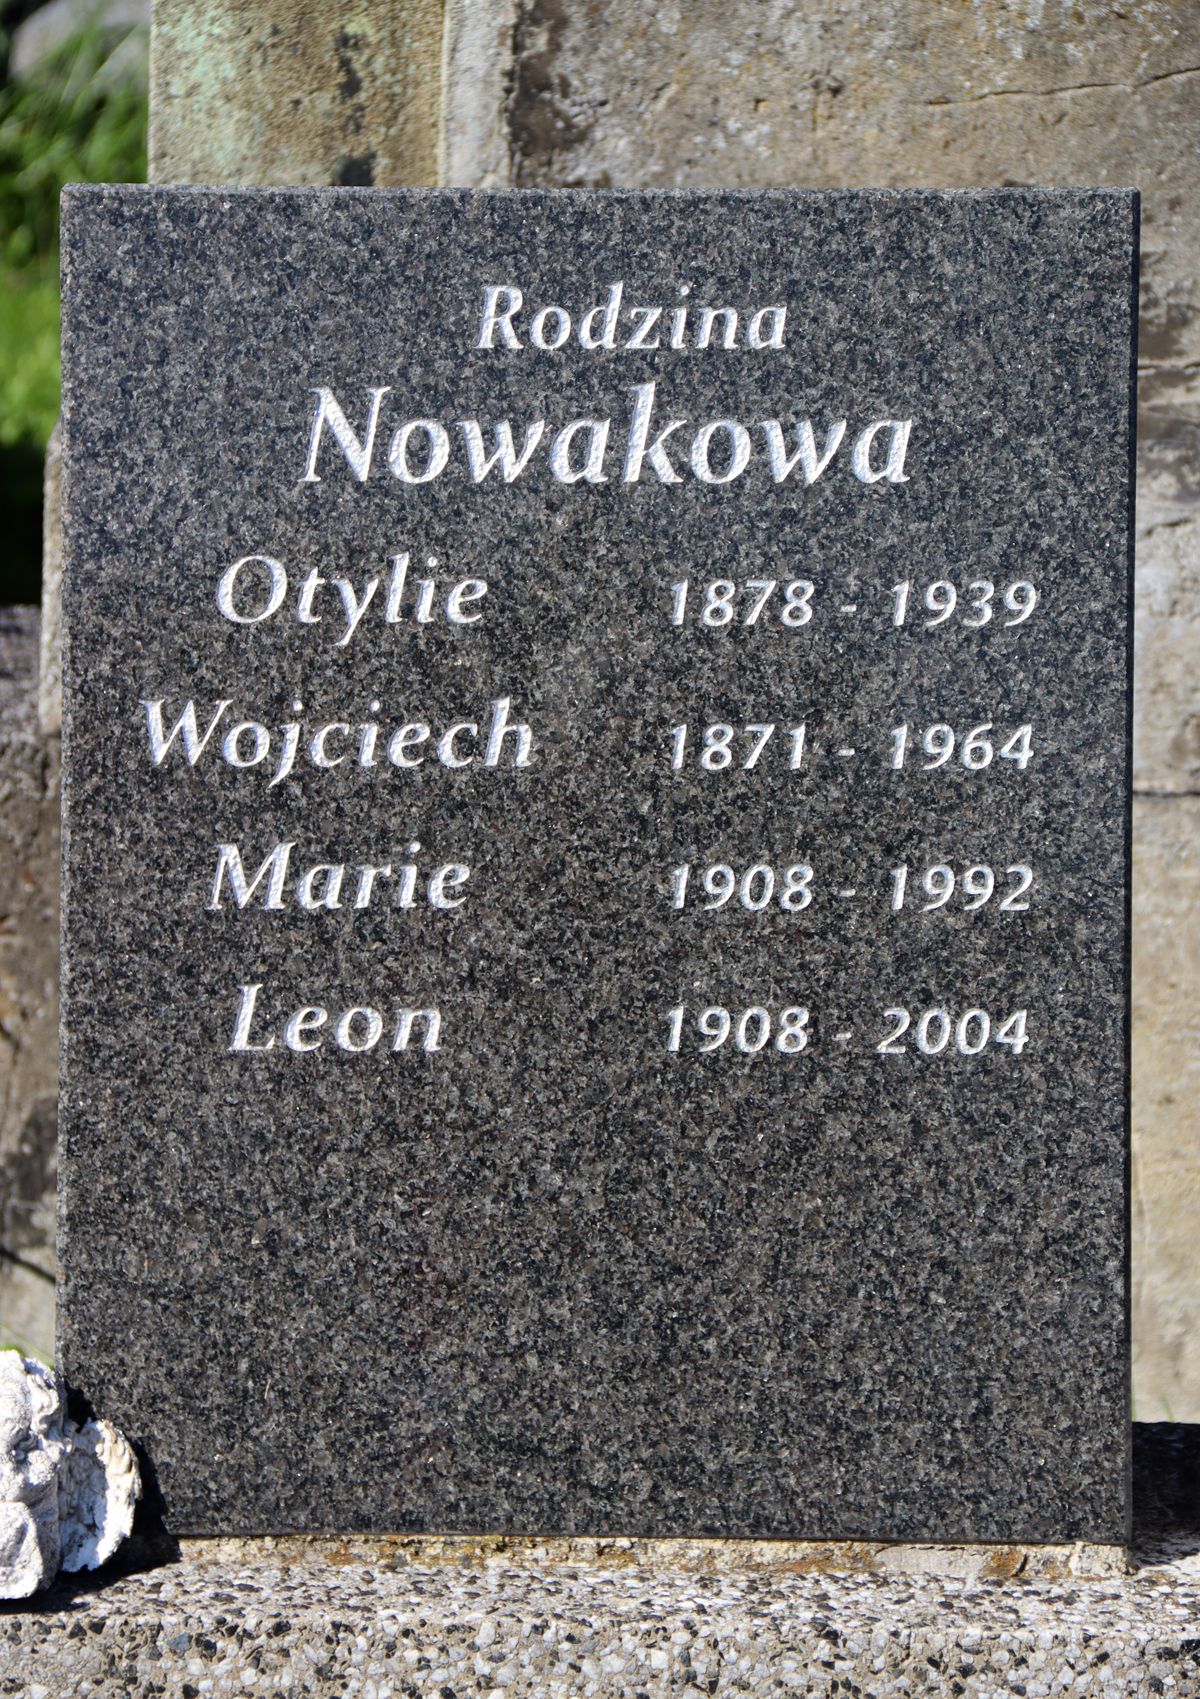 Inscription from the tombstone of the Nowak family, Karviná cemetery